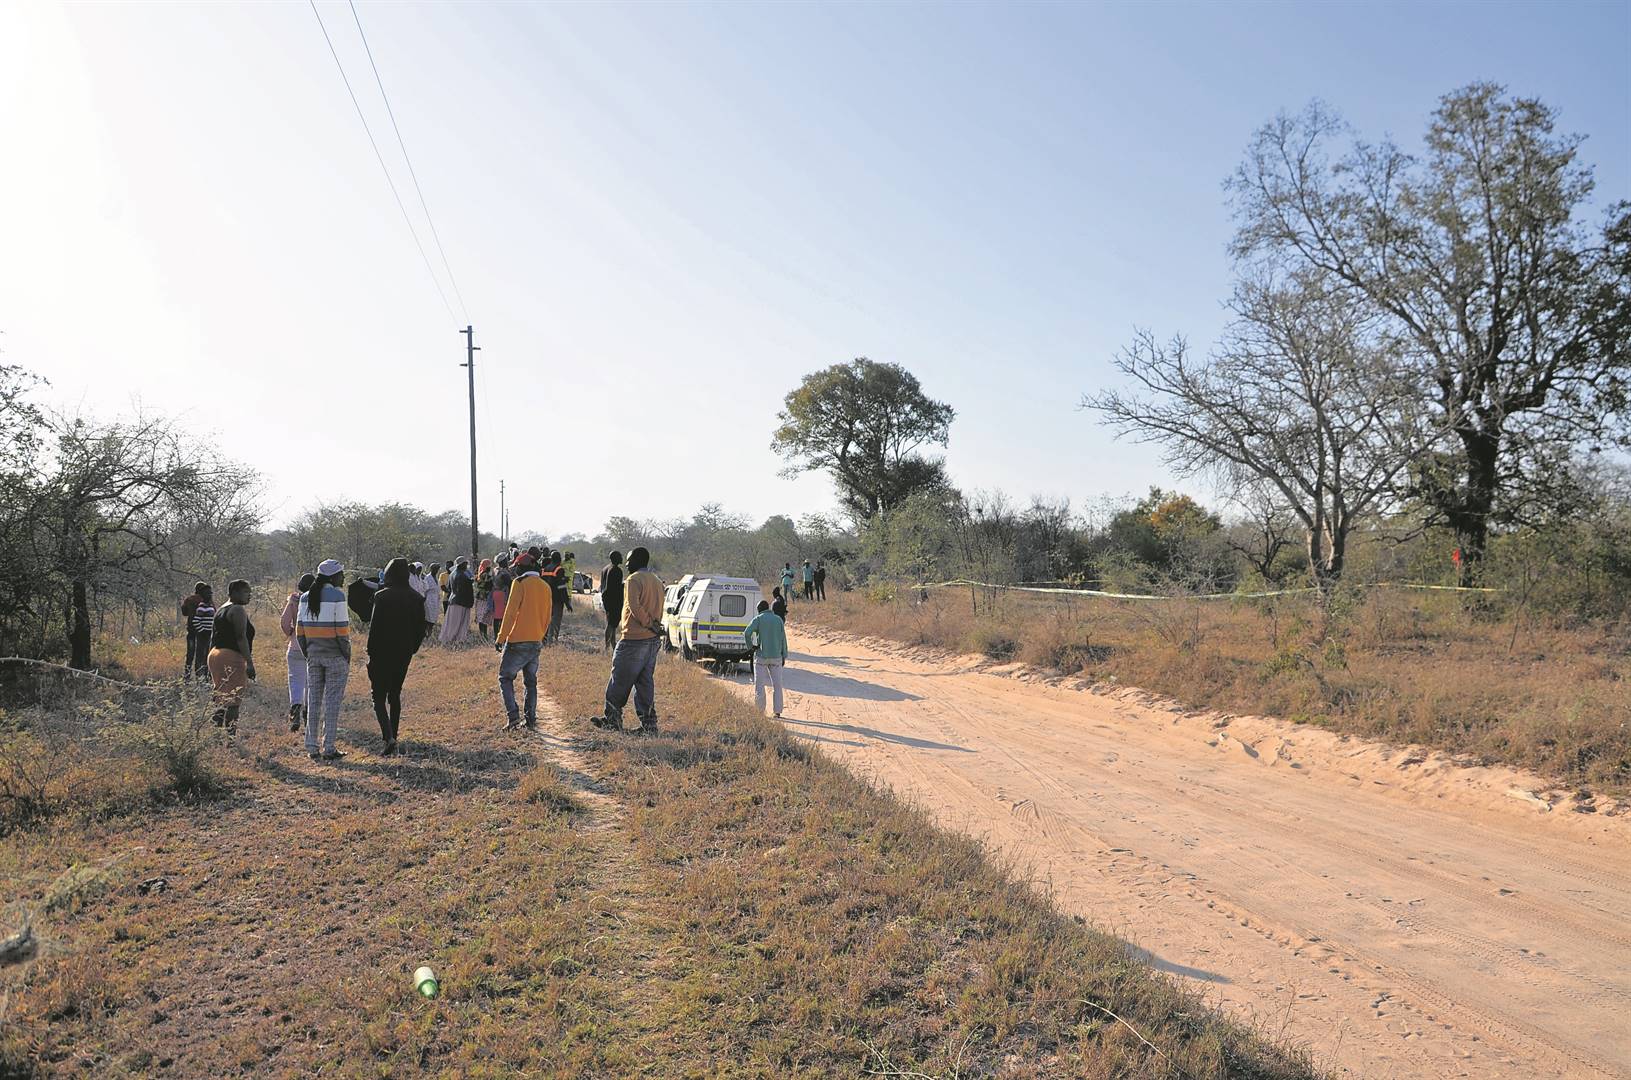 Shocked villagers stand next to the bushes where Domingo Hlungwane’s body was found hanging from a tree.